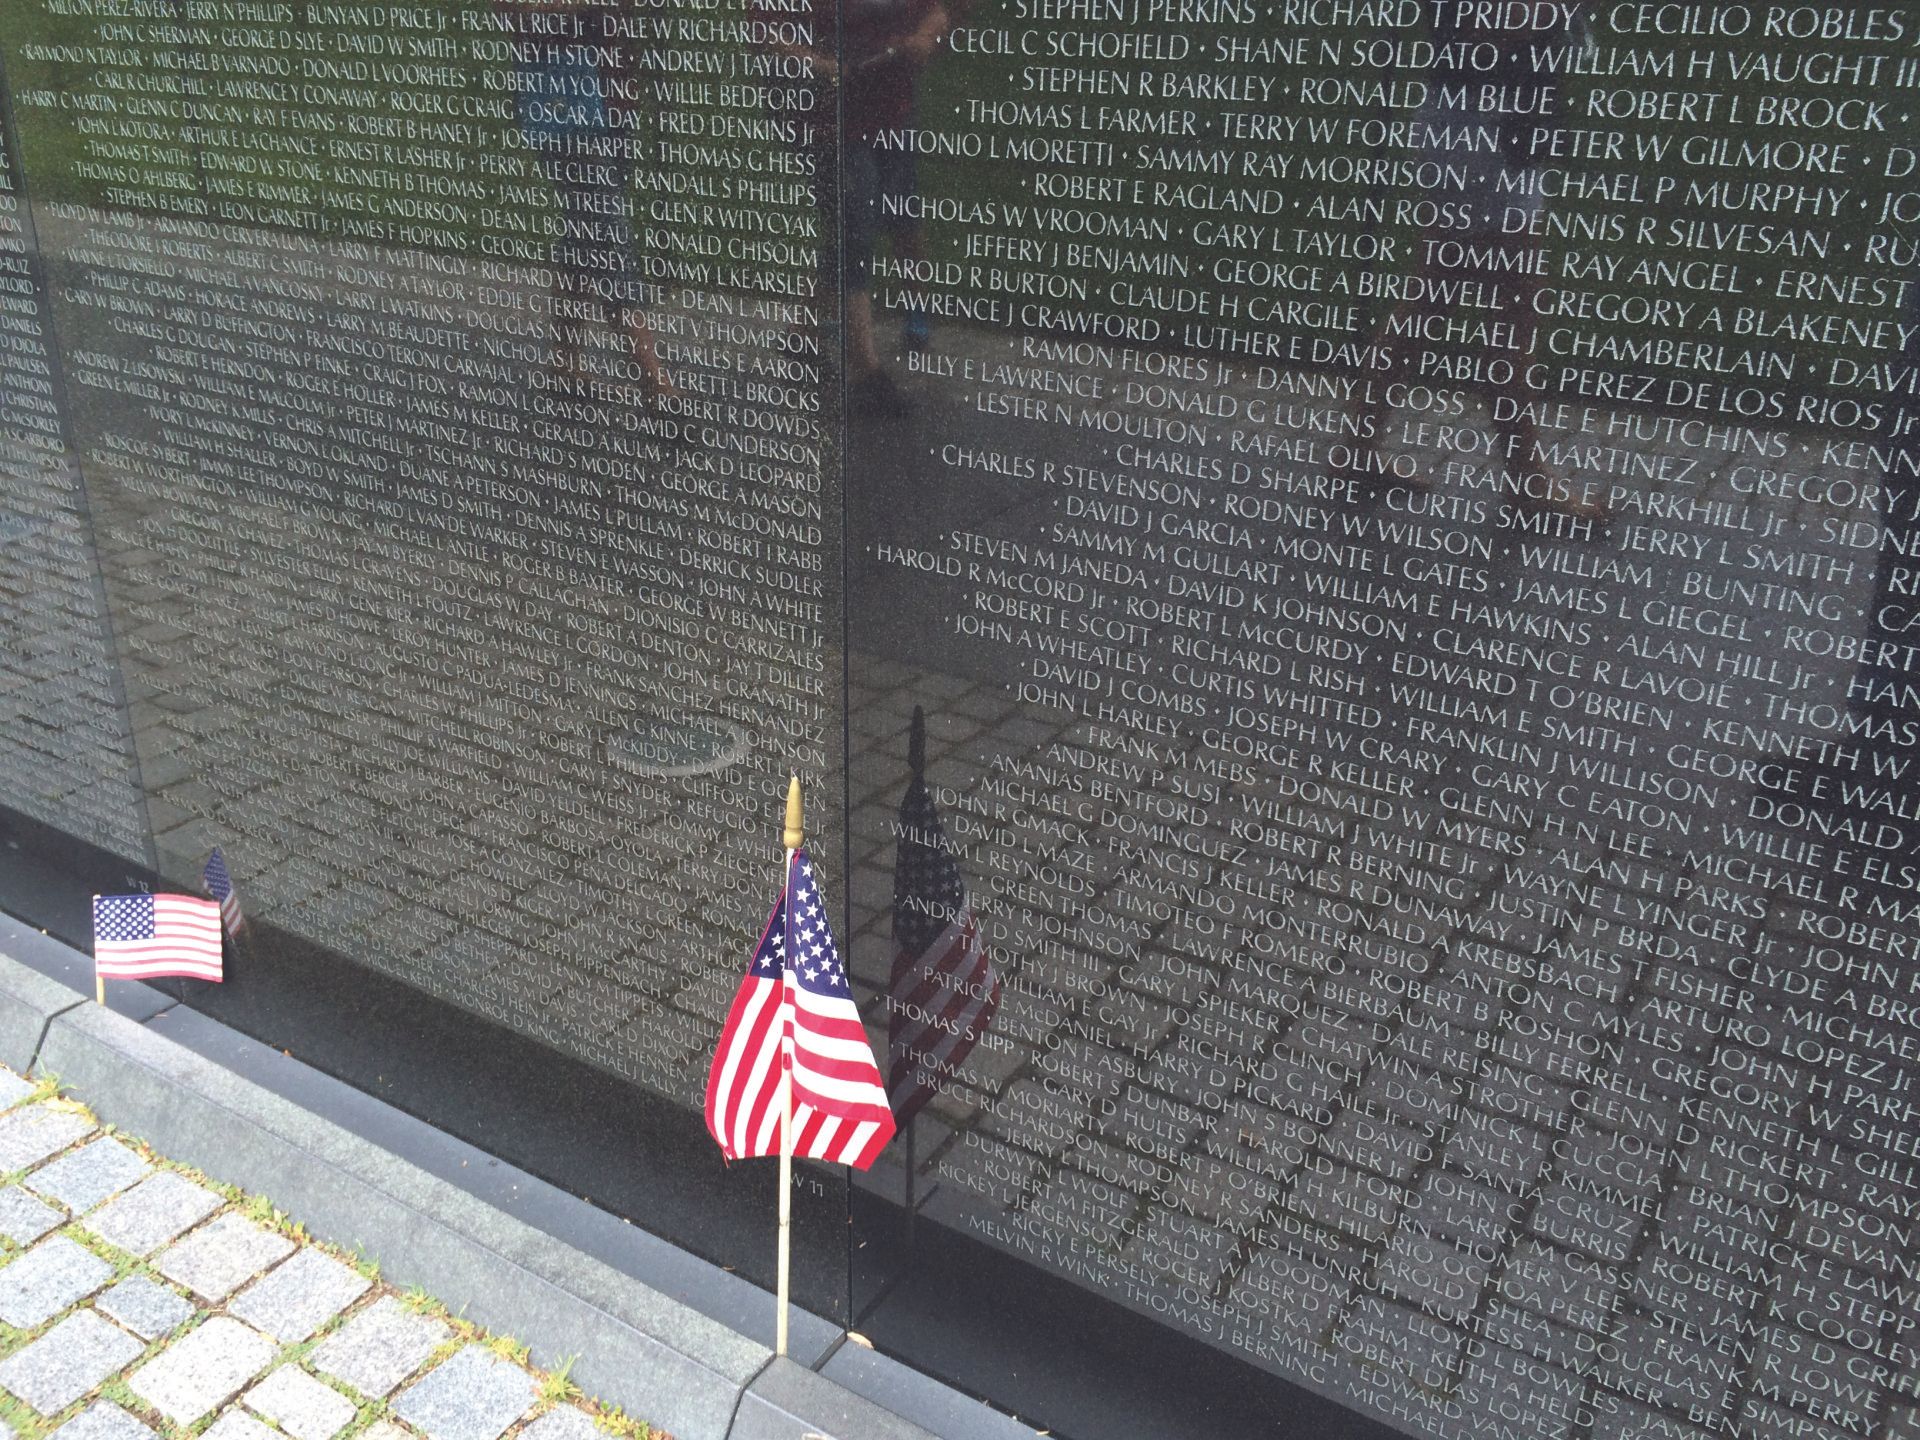 A portion of the Vietnam Memorial, dedicated in 1982 (Author Photo)